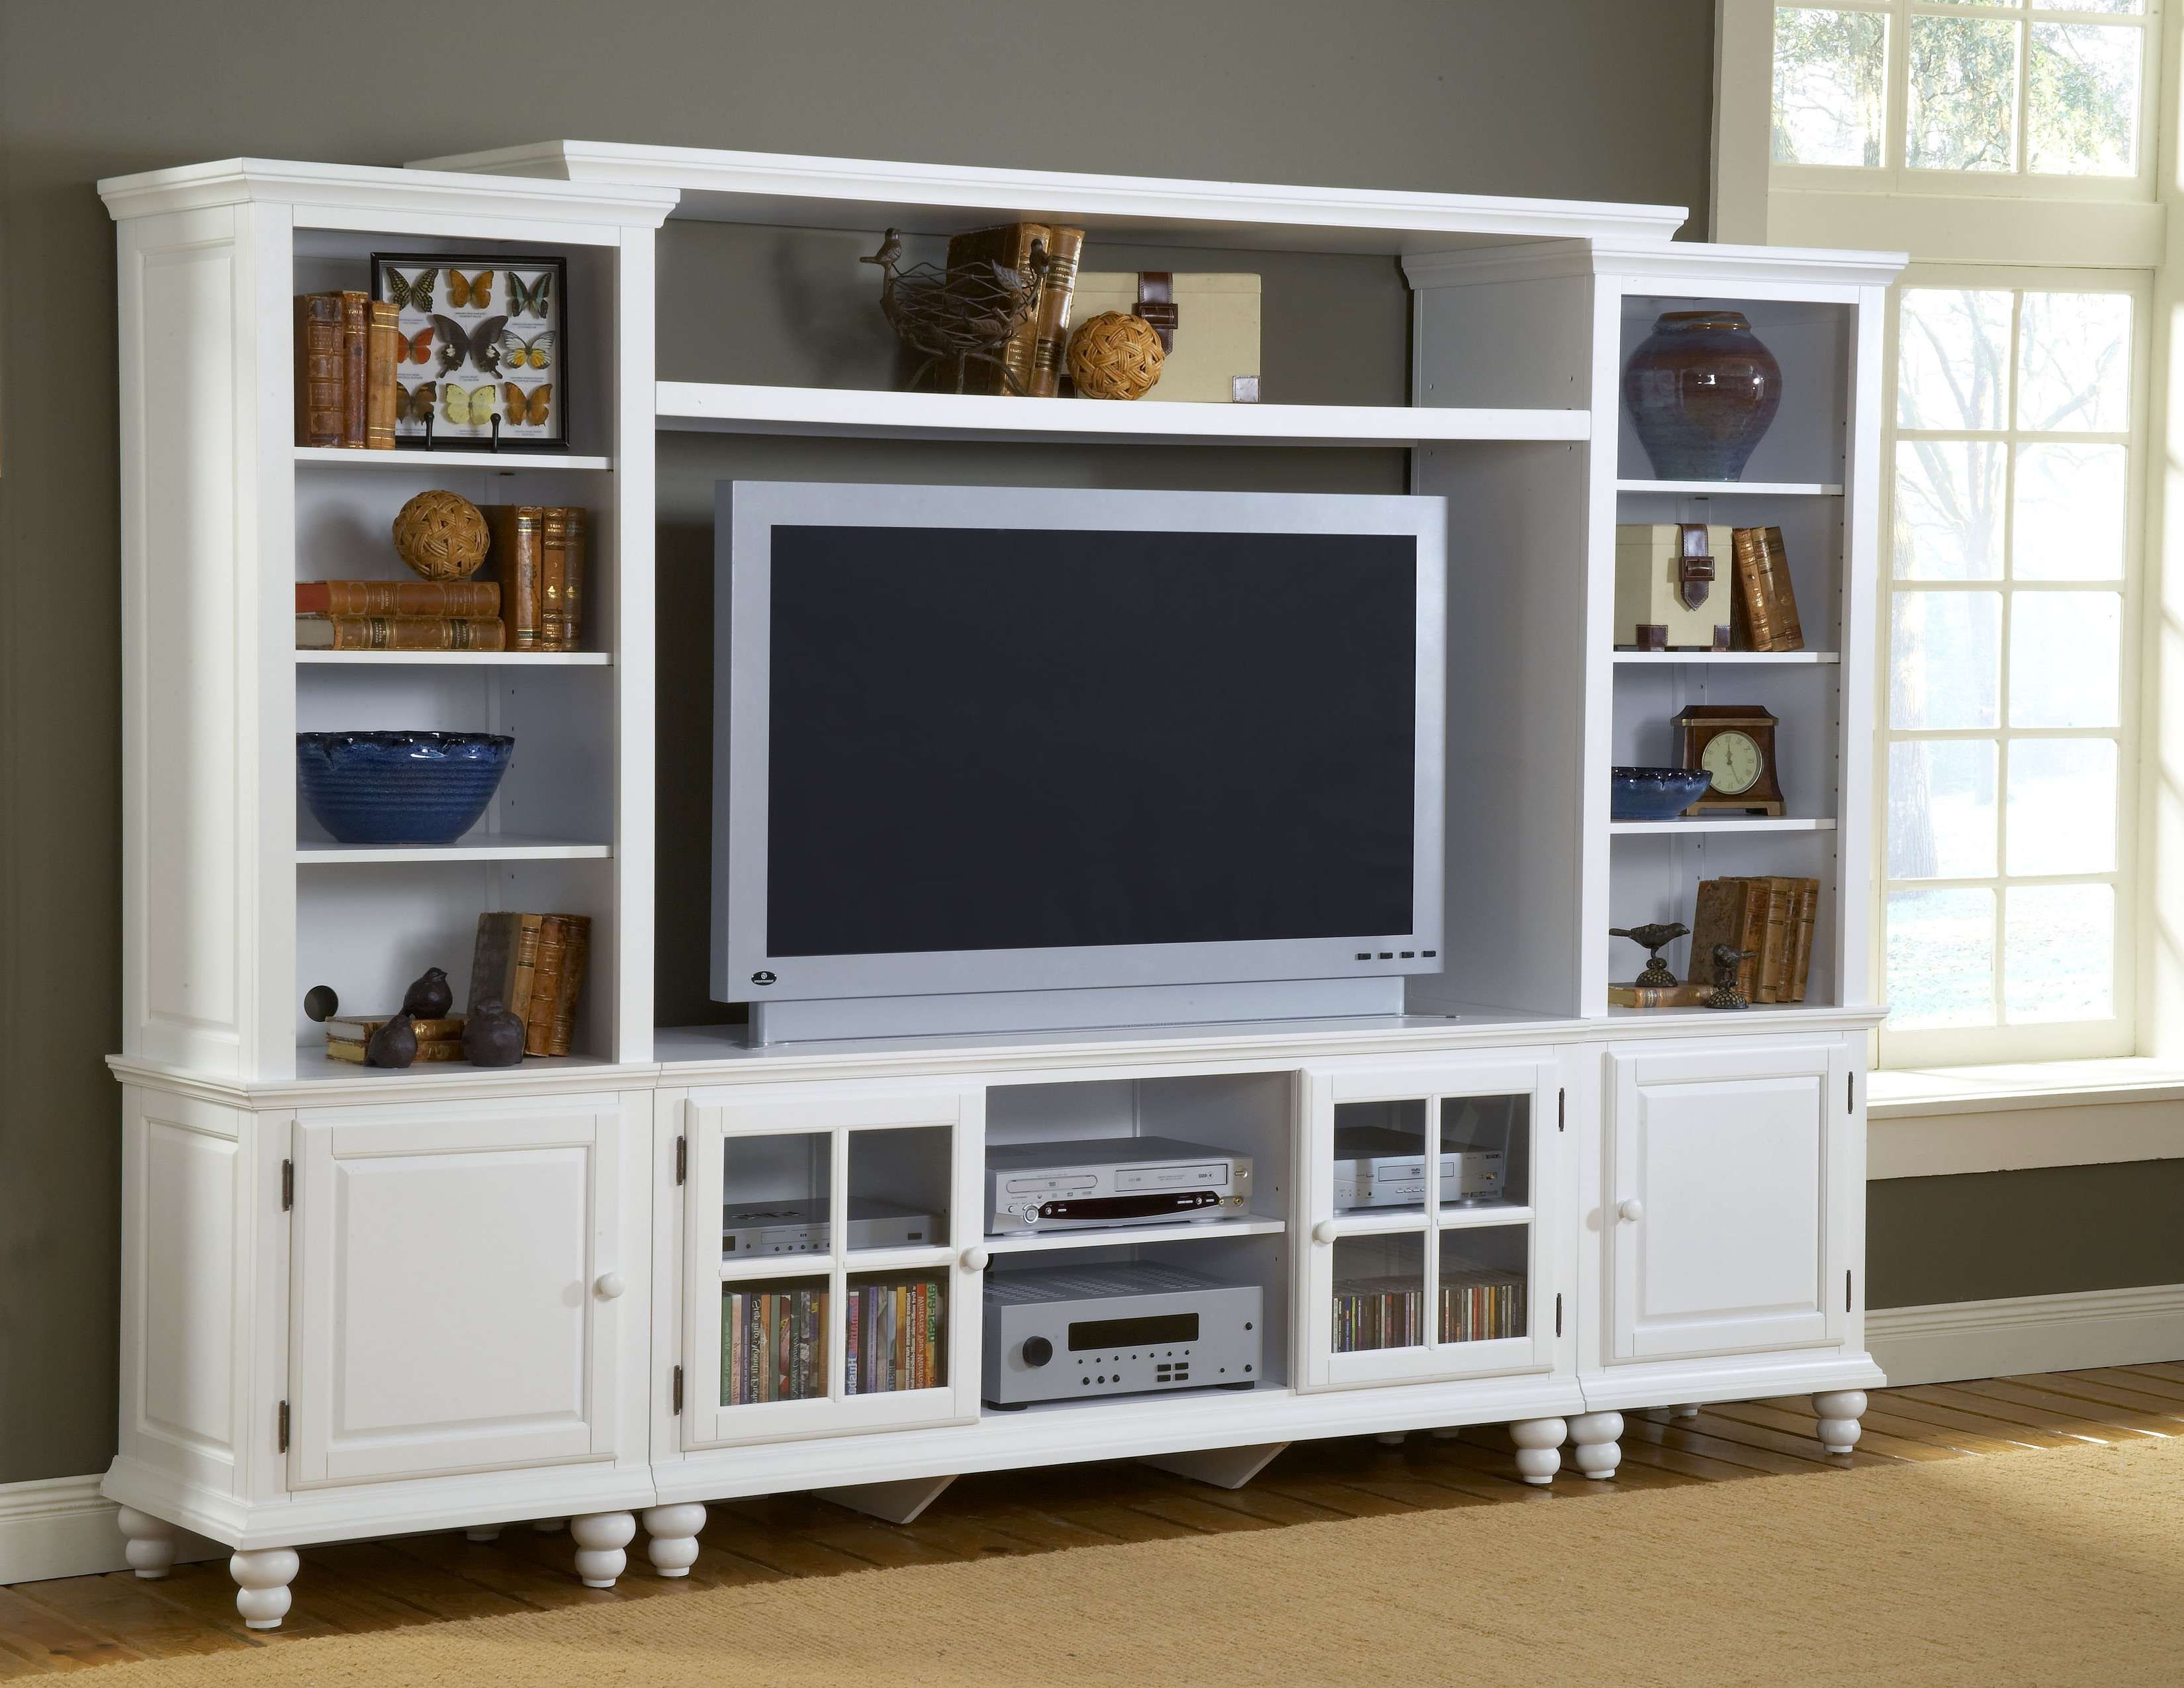 Bedroom : Mesmerizing Awesome Storage Storage Design Bedroom Wall Inside Tv Cabinets With Storage (Gallery 20 of 20)